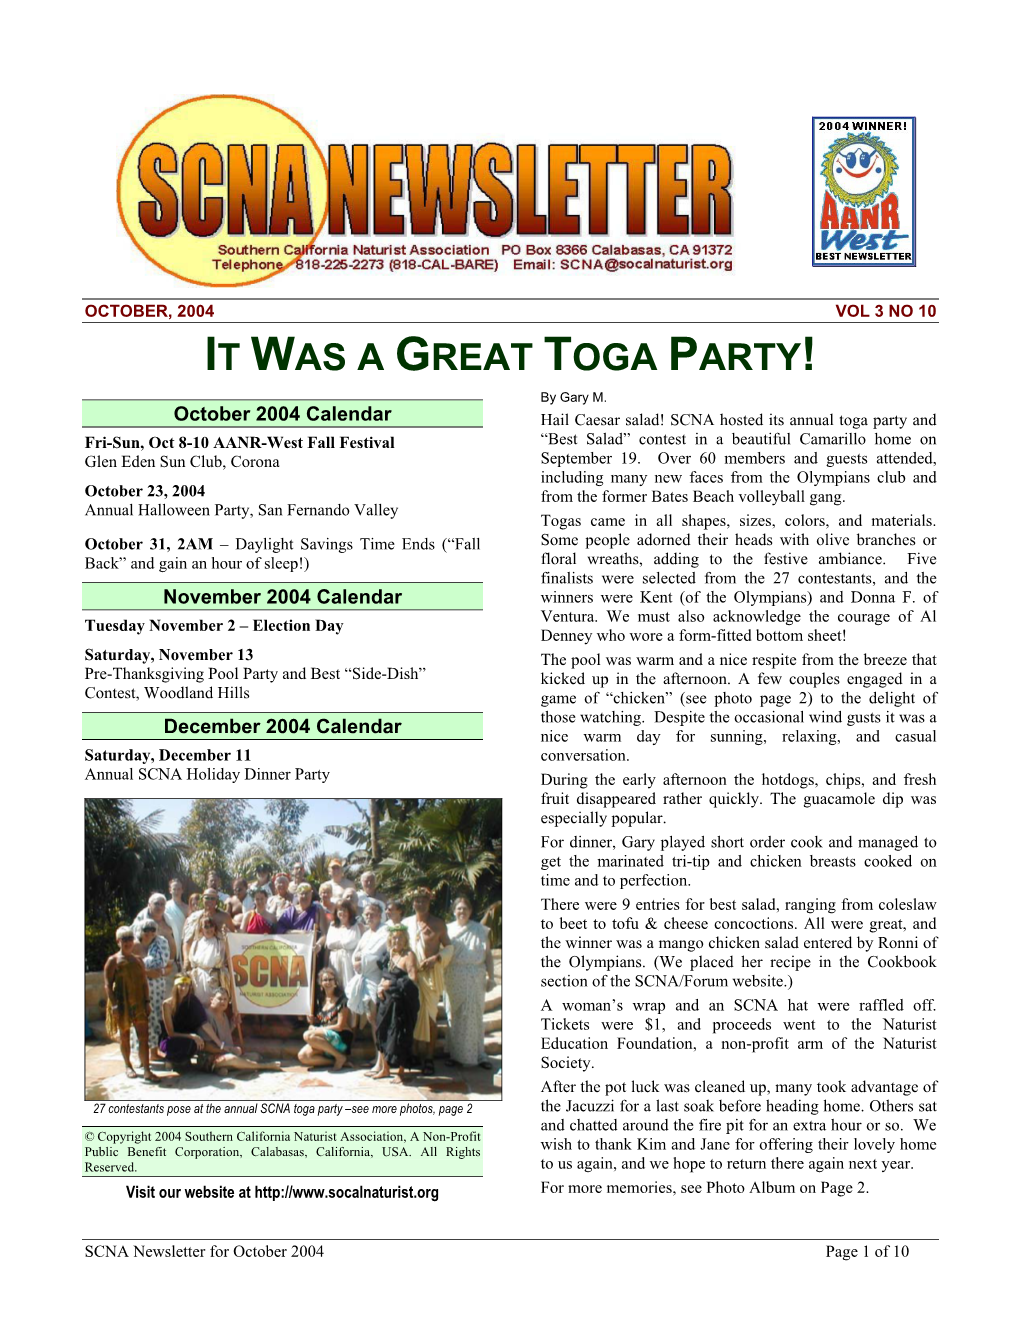 IT WAS a GREAT TOGA PARTY! by Gary M